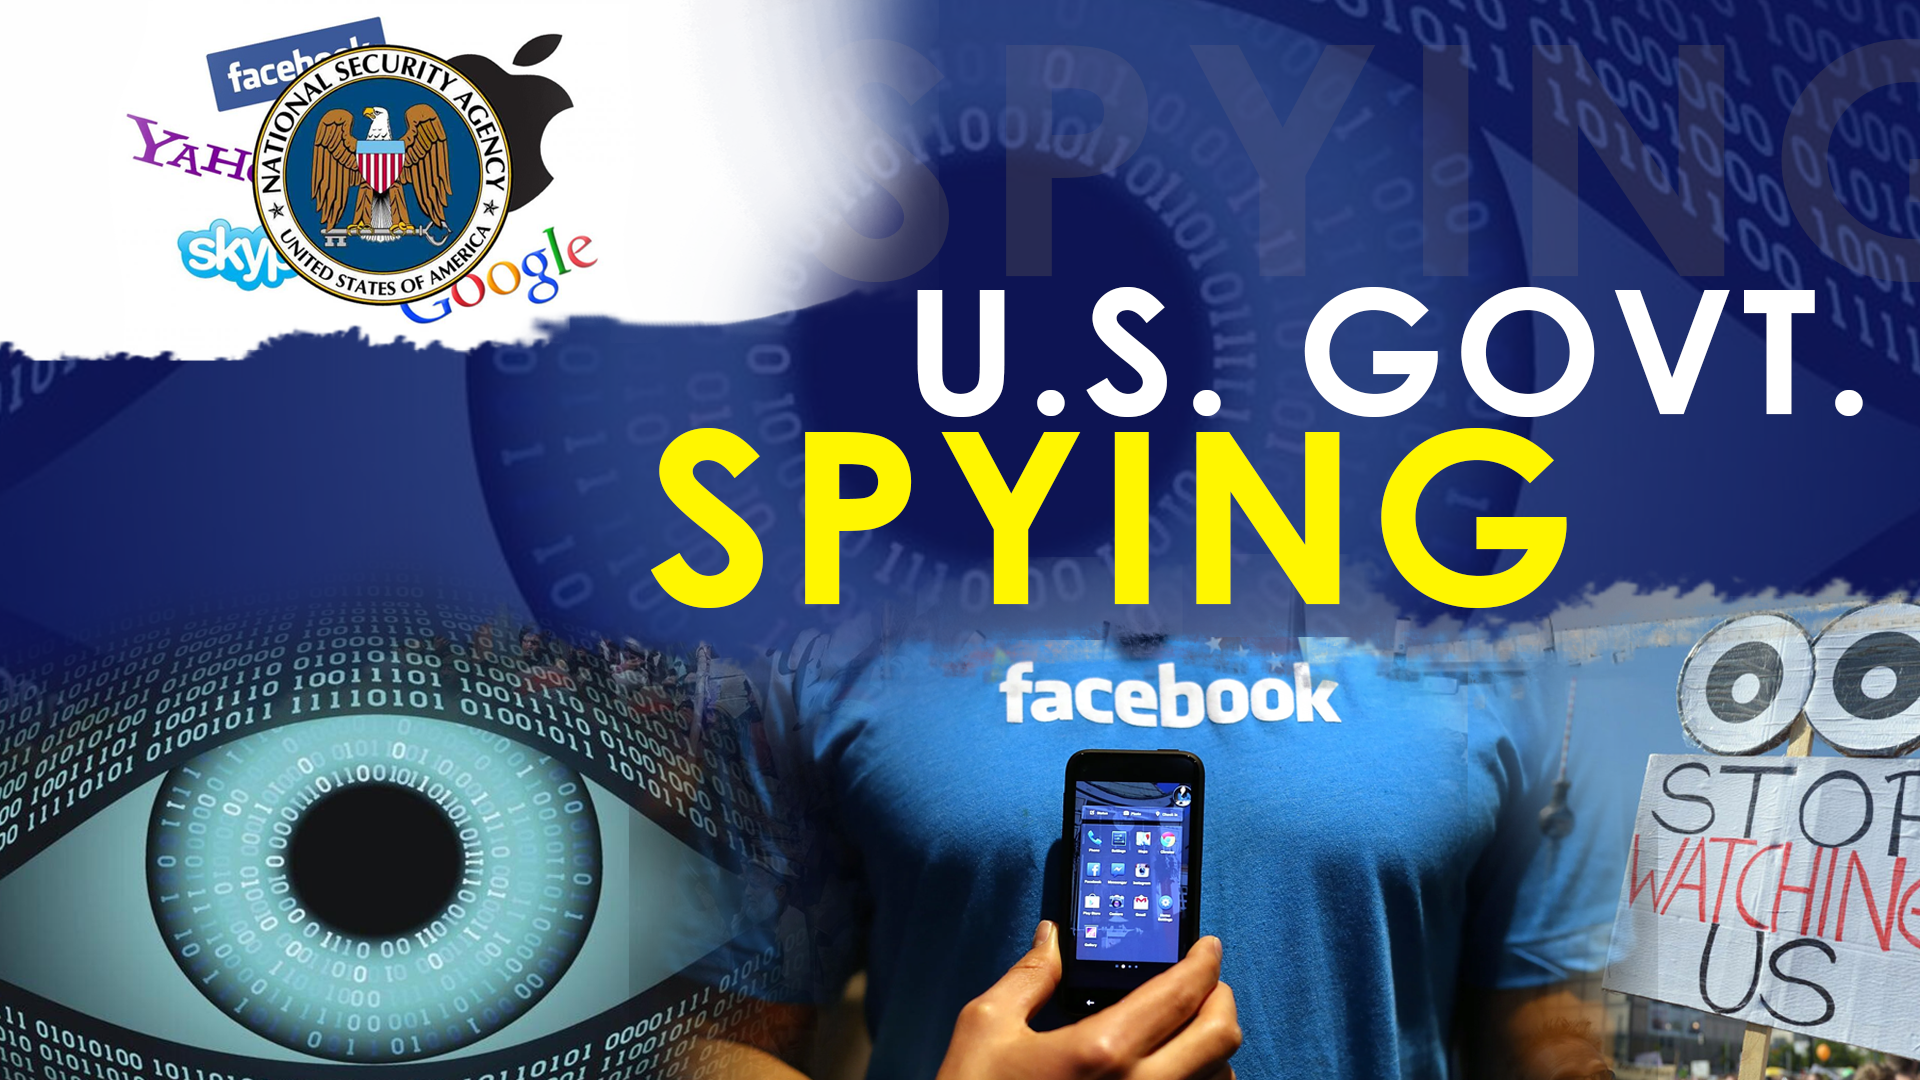 Americans are tired of being spied on